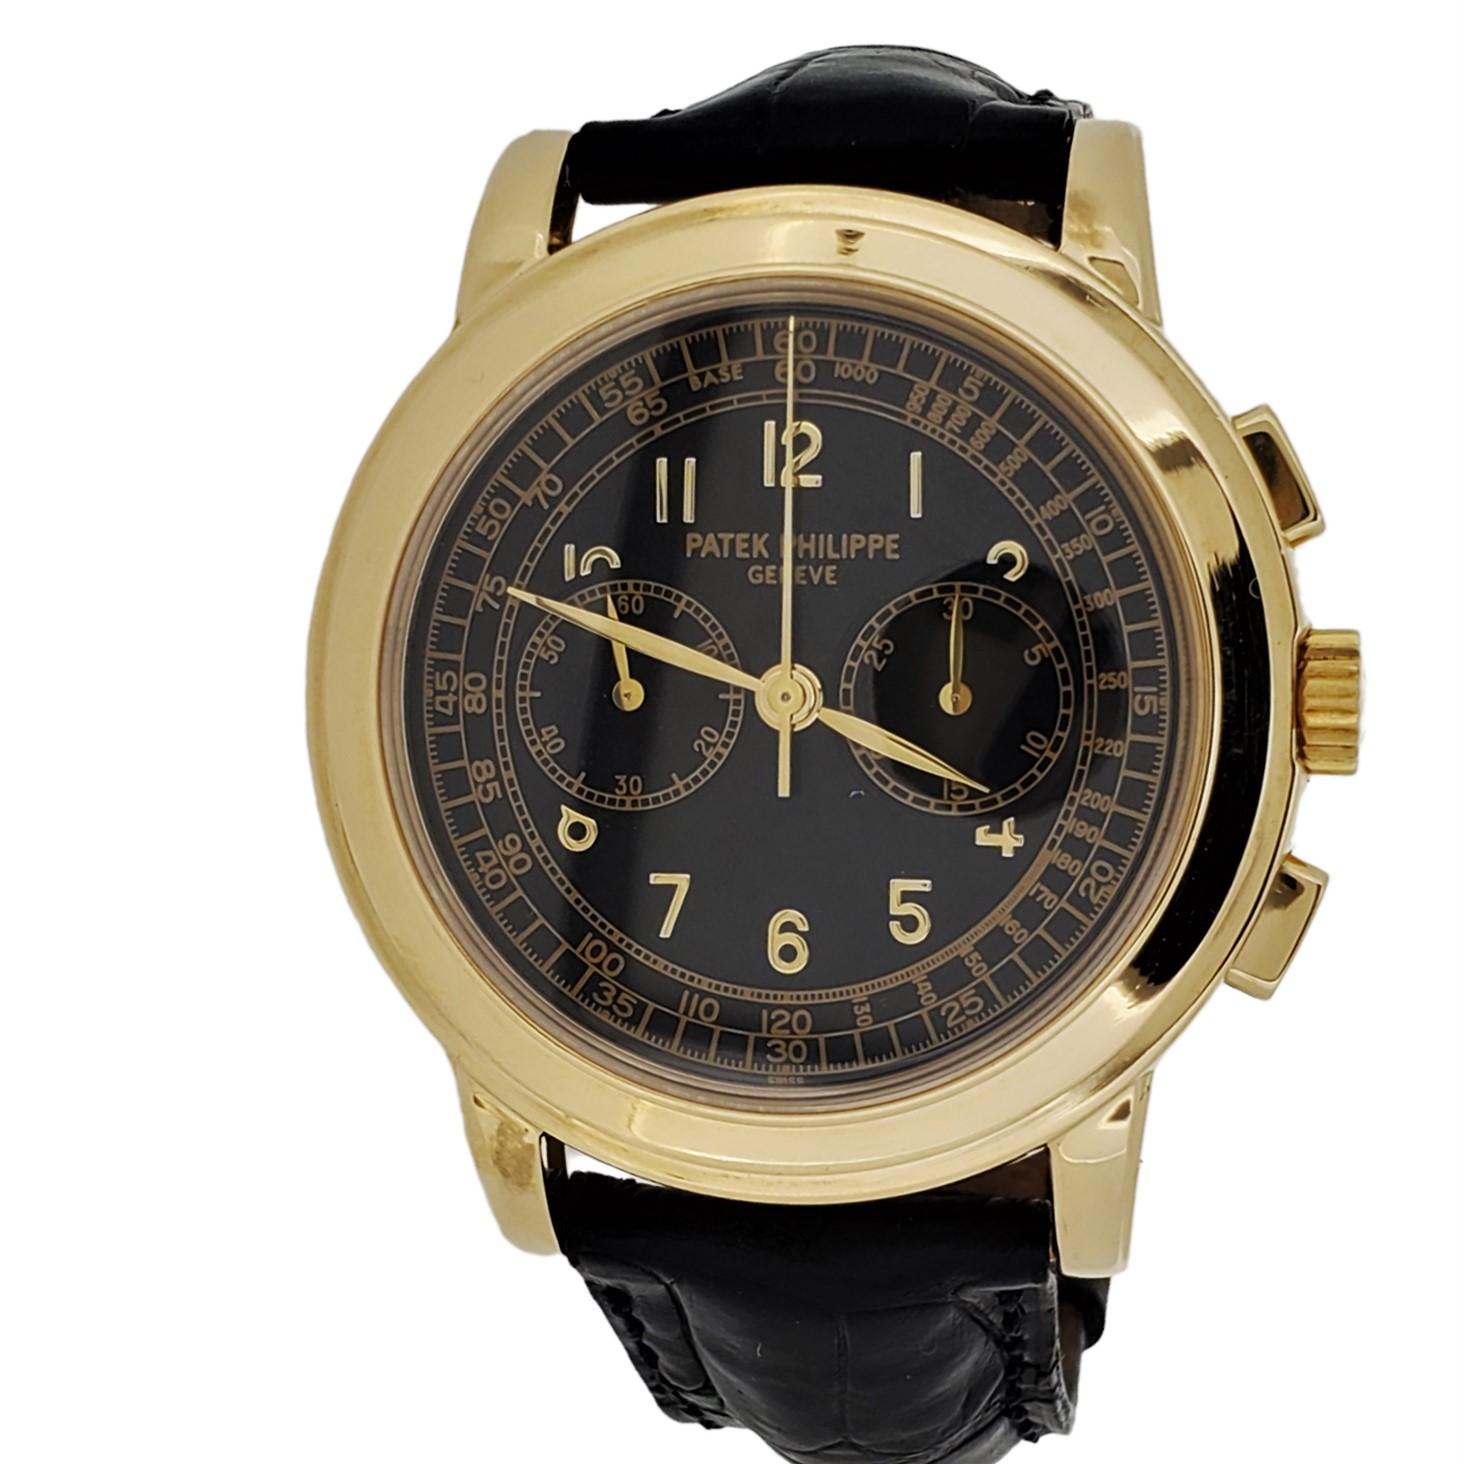 Patek Philippe 5070J Chronograph Watch Yellow gold 42 mm Case Circa 2000 For Sale 1